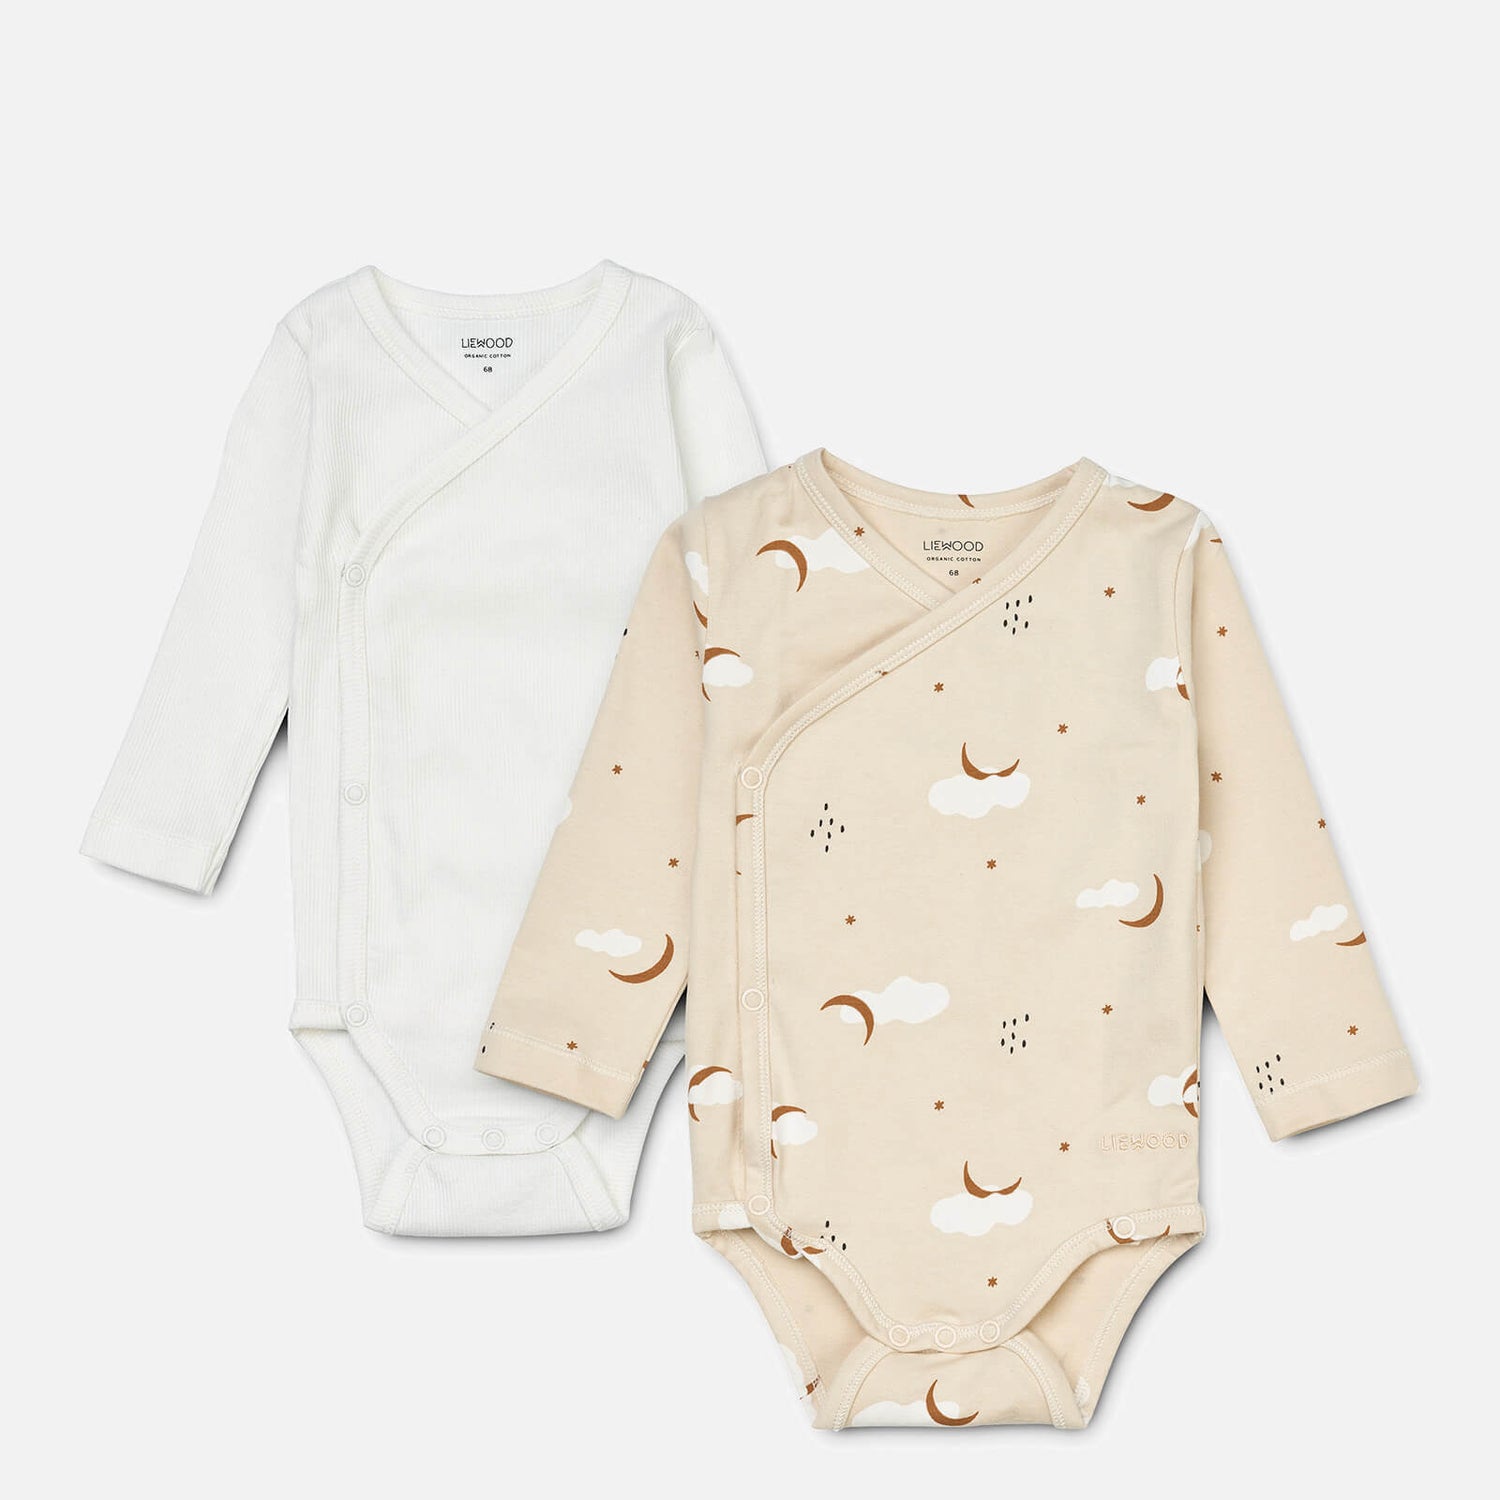 Liewood Baby Hali Two-Pack Cotton-Blend Babygrow - 3 Months